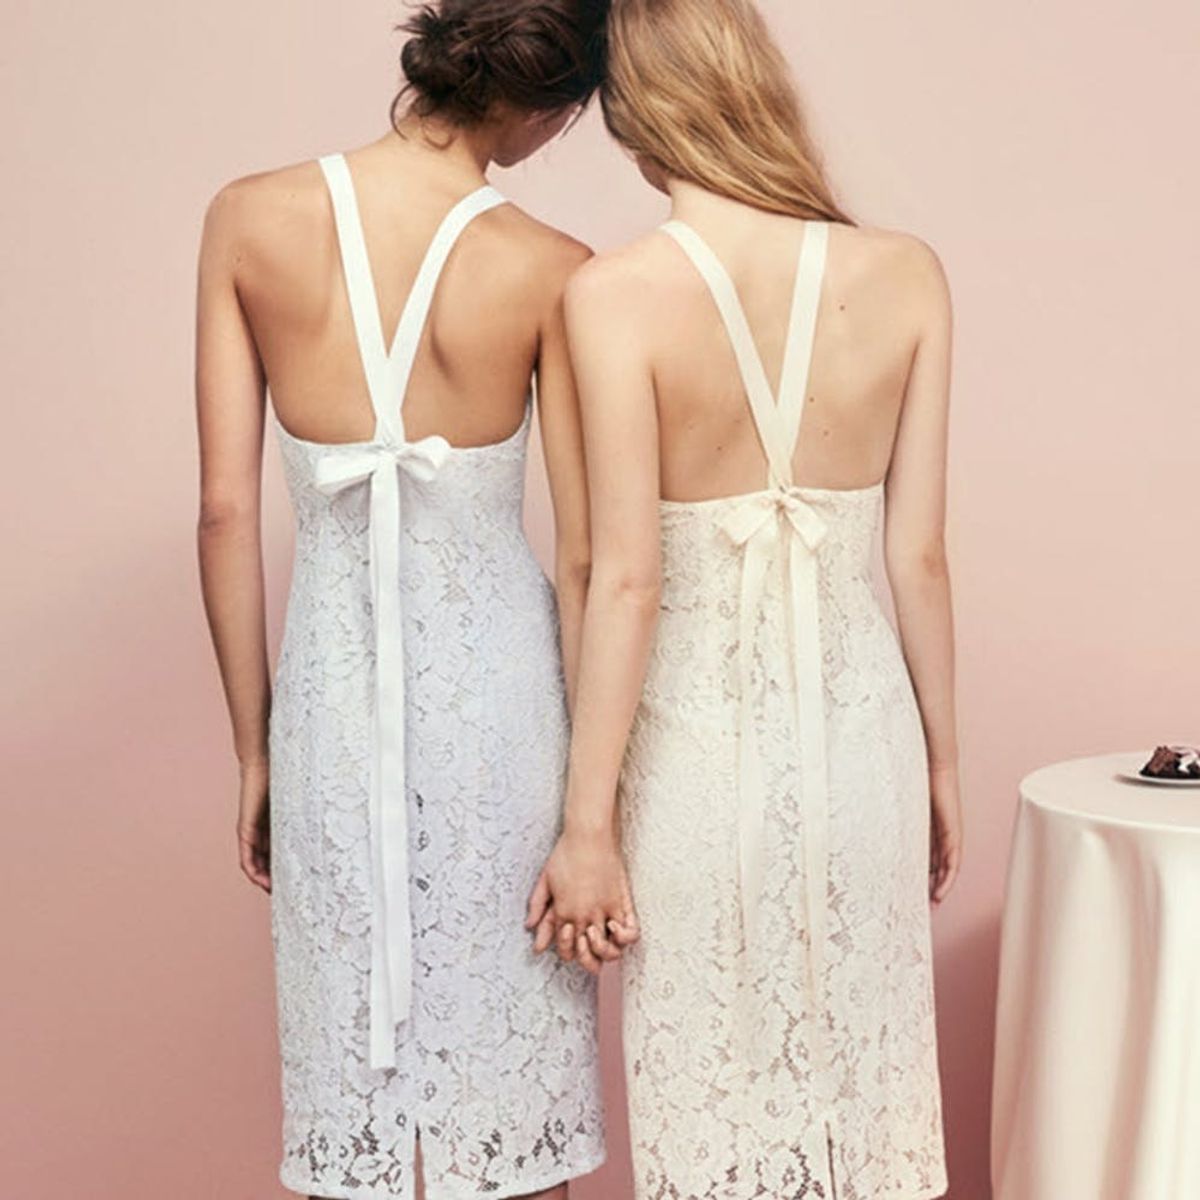 The New Fashion Brand That’s Reinventing the Bridesmaid Dress Market